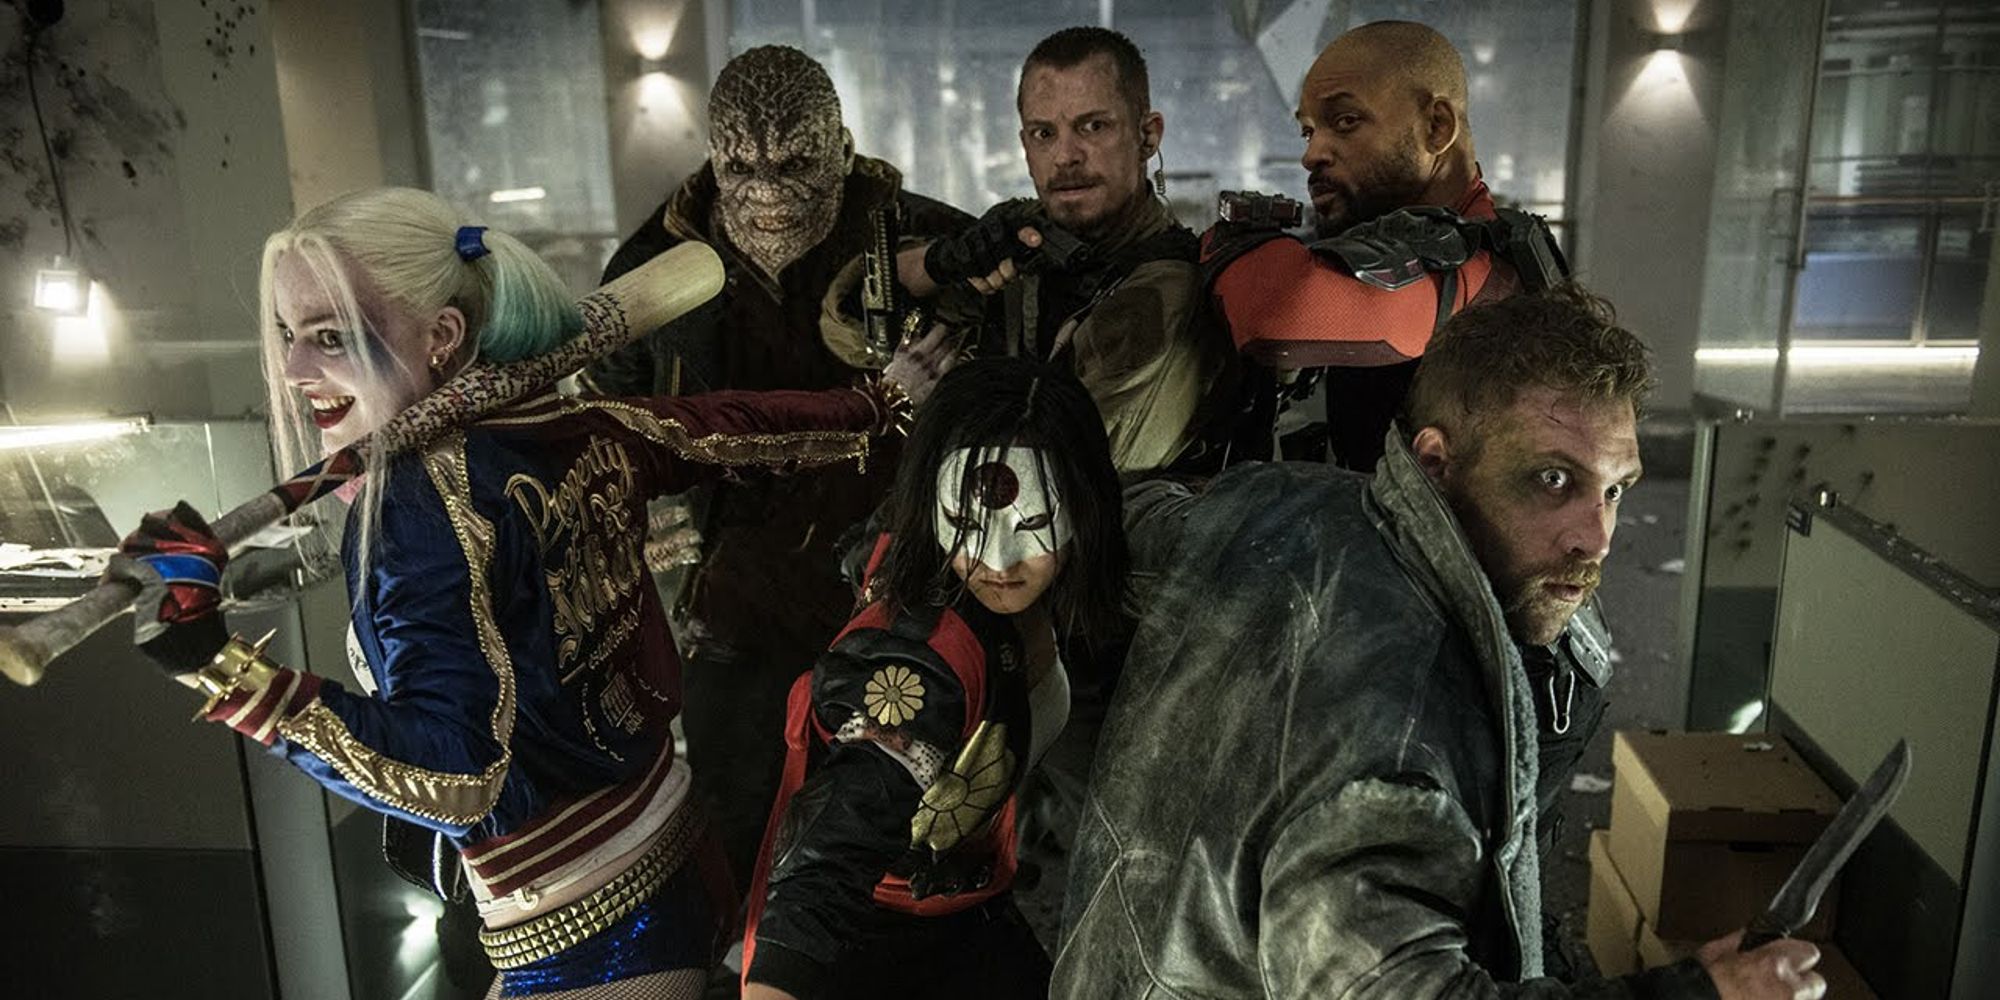 Task Force X grouped up together in an office building in Suicide Squad (2016)